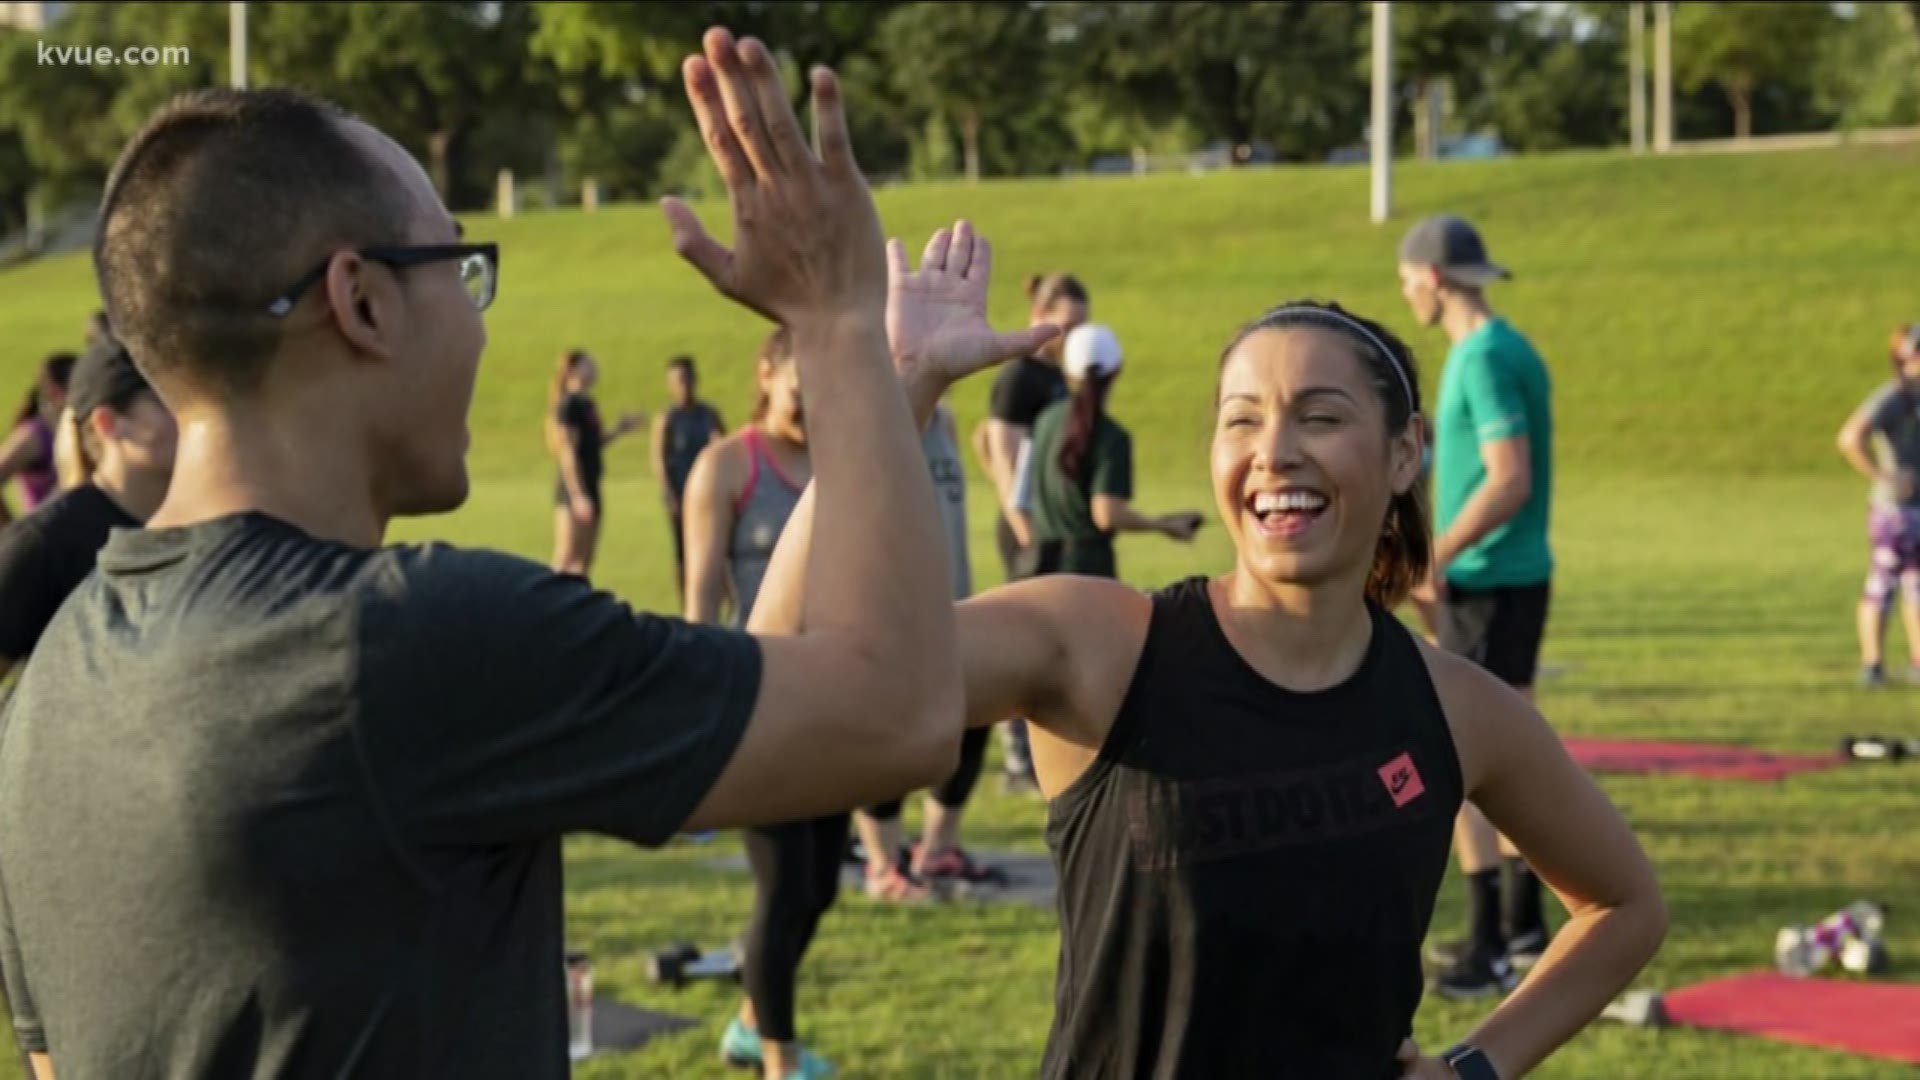 Whether it's spring, summer, fall or winter, it's never a bad time for fitness. And you don't even need to leave your house to get fit! Joining KVUE with some workout demos is Casey Nall with Camp Gladiator.